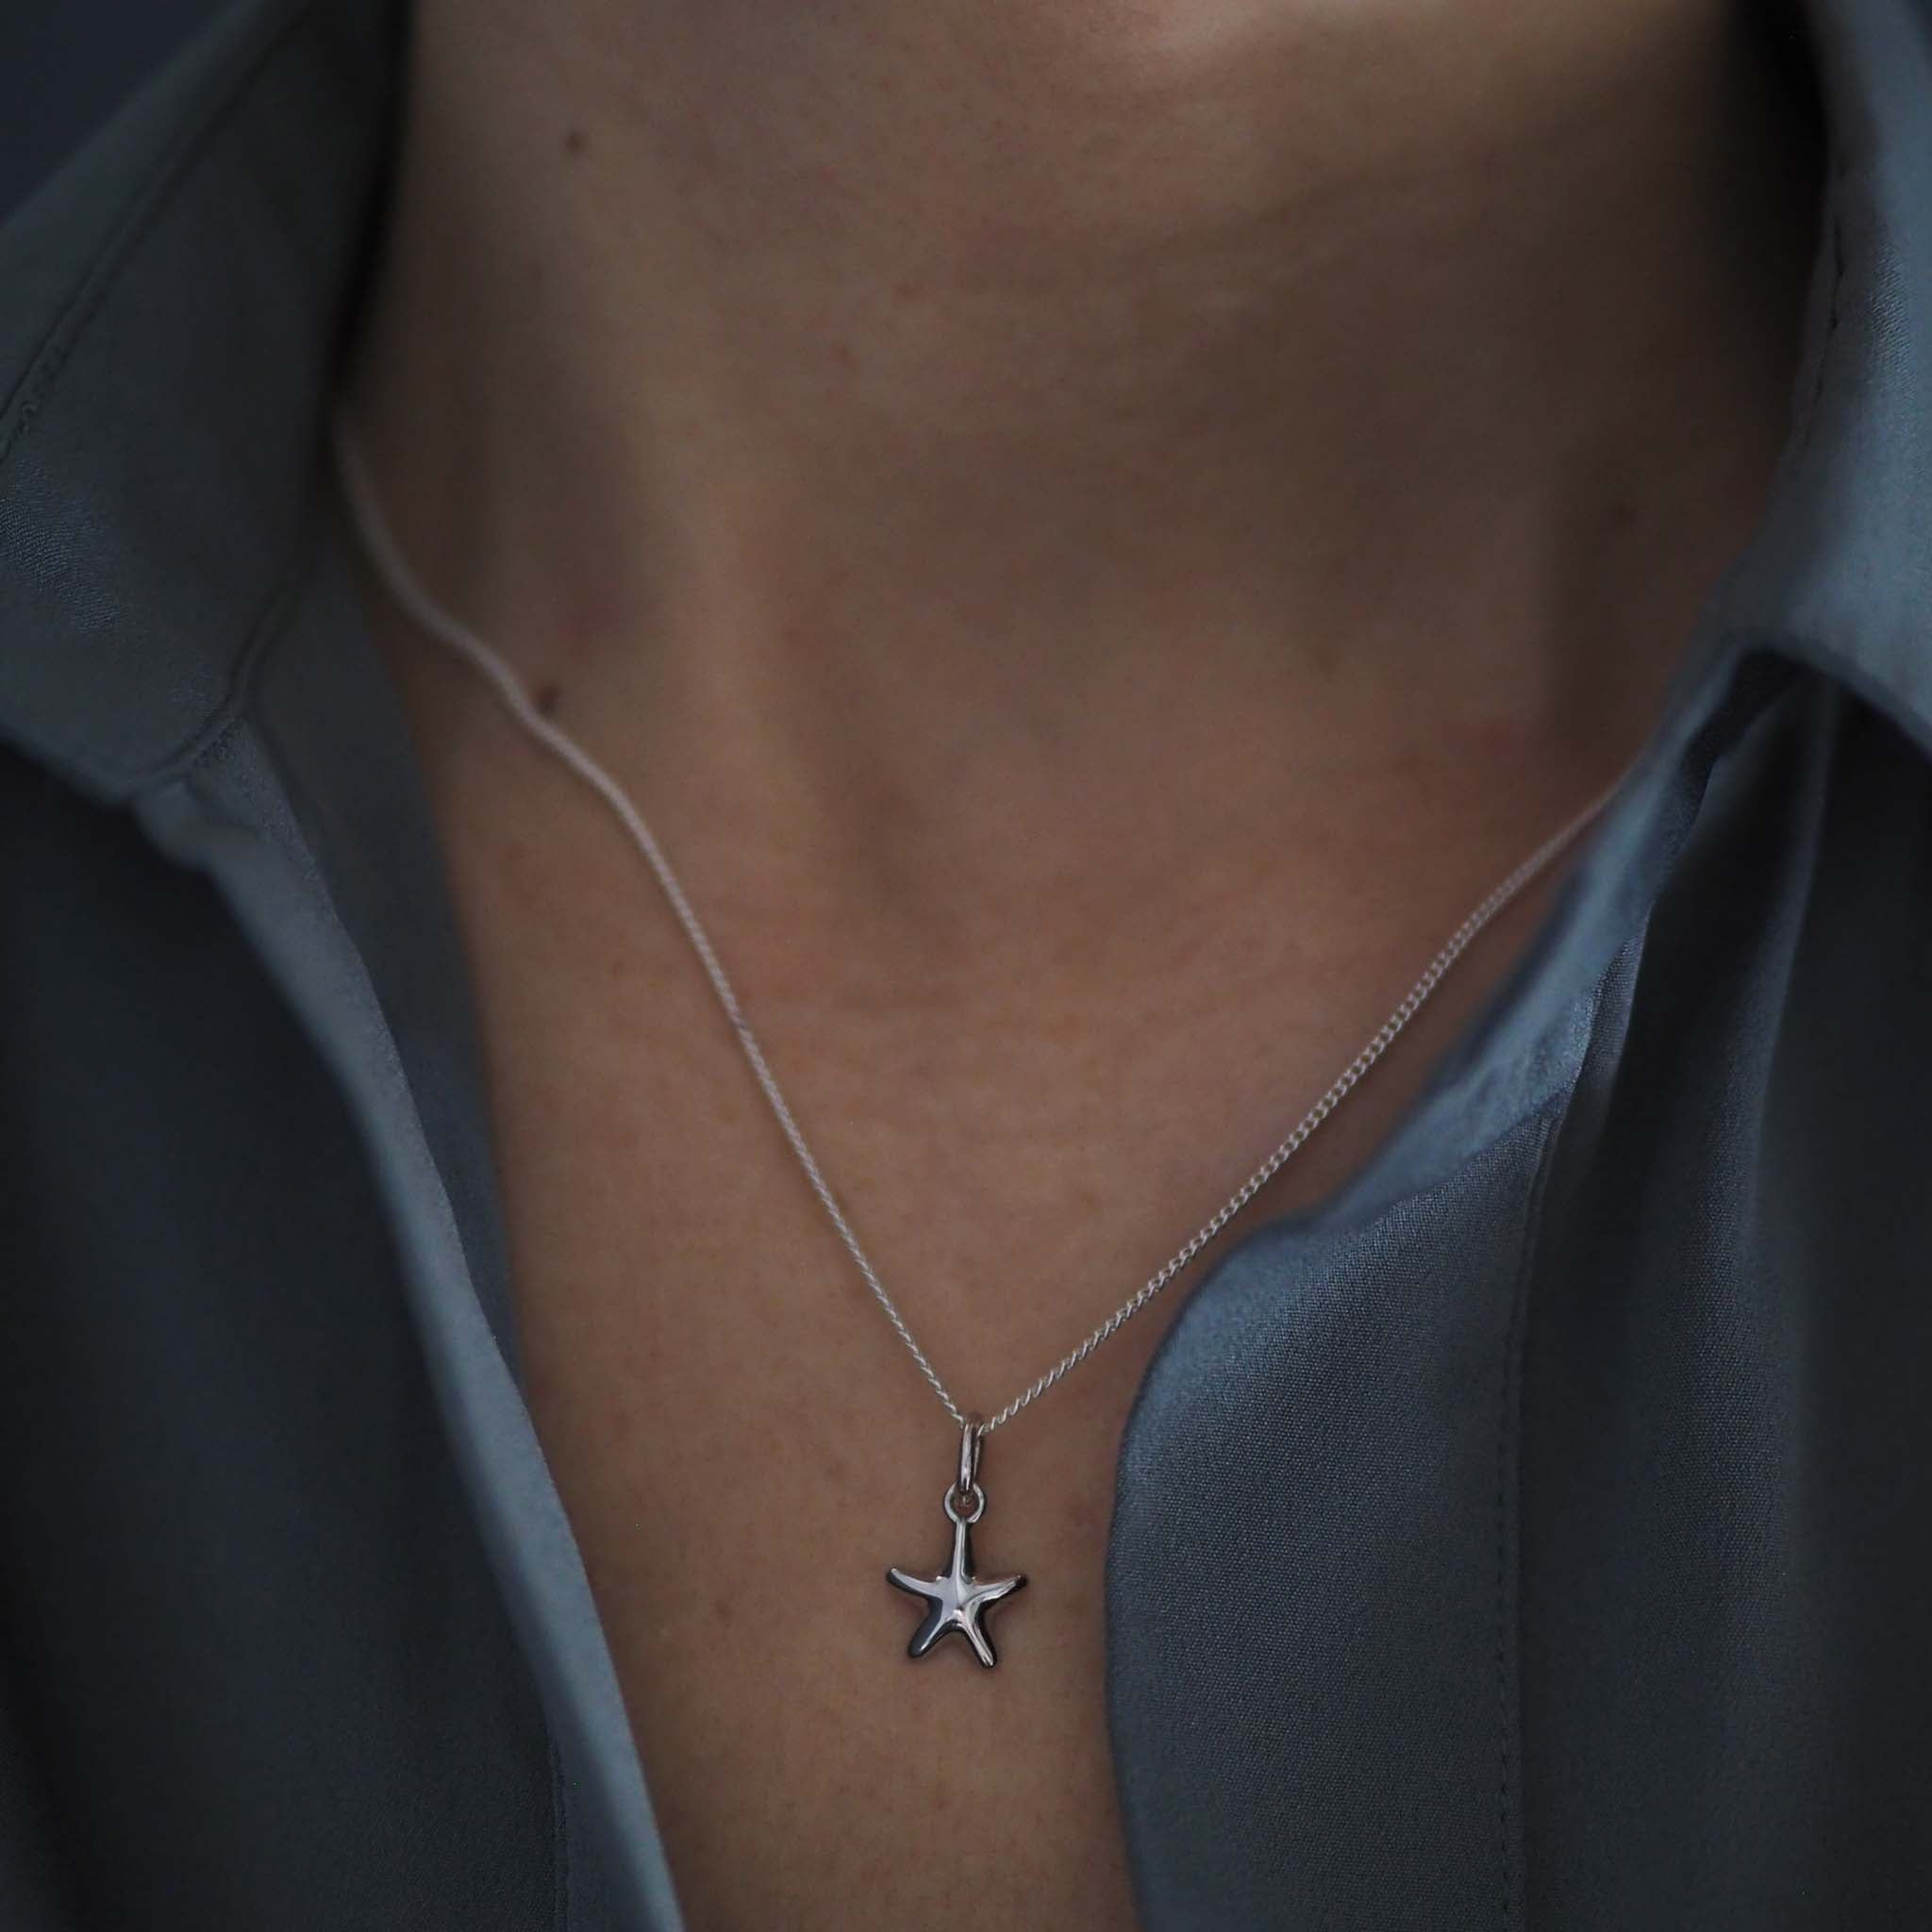 Bianca Jones sculptural style starfish necklace in sterling silver or gold vermeil, evoking the beauty of oceanic life.